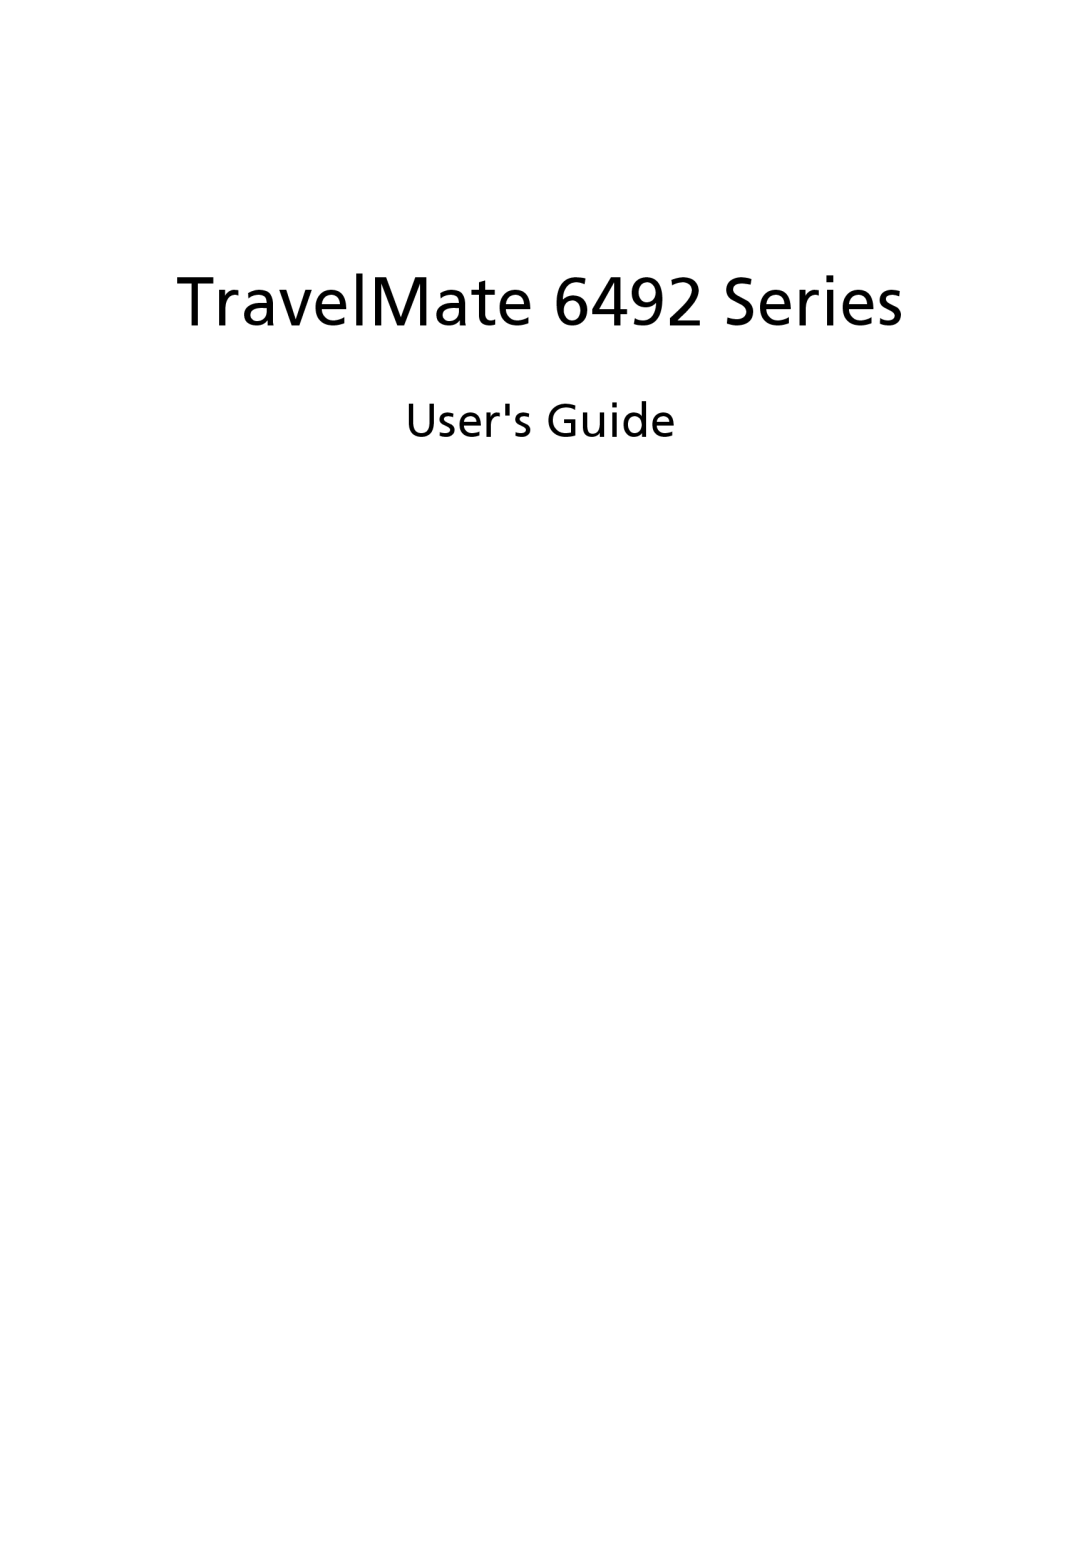 Acer 6492G manual Users Guide, TravelMate 6492 Series 